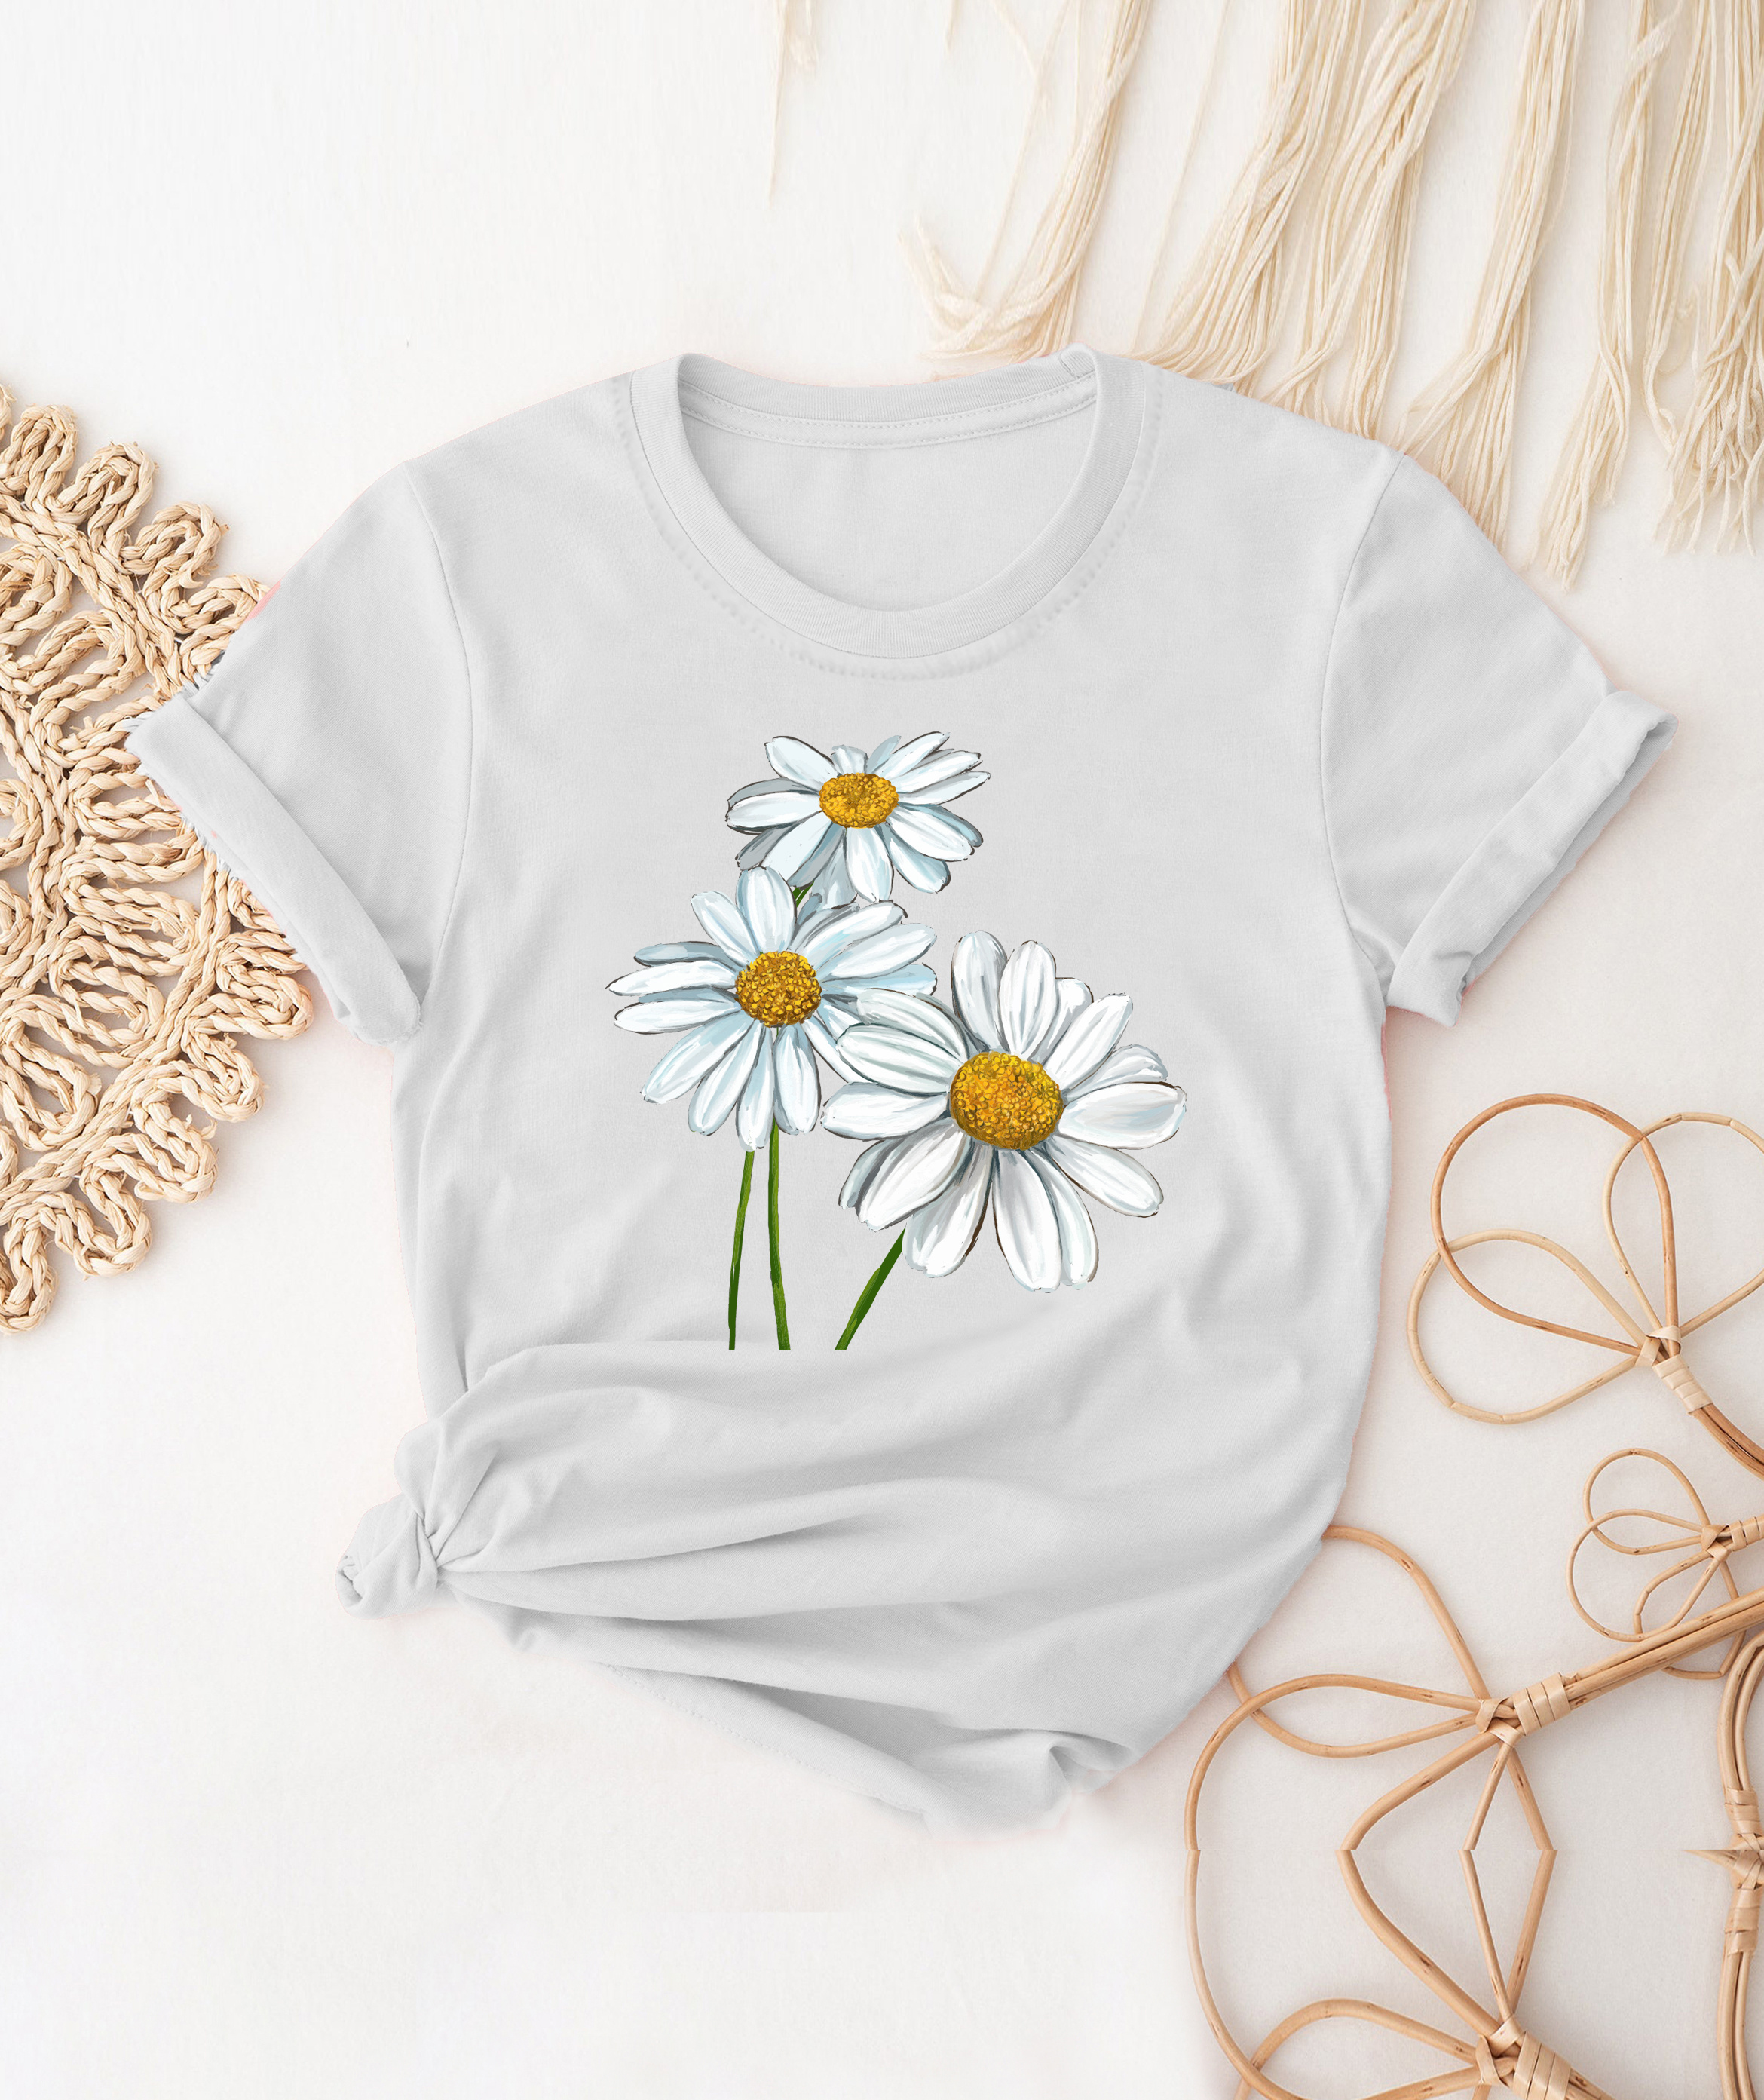 Have A Good Day Shirt, Spring Shirts,boho Cute T-shirt,leopard Daisy Trendy  Aesthetic Tee,floral Shirt for Women,gift for Mom,birthday Gift -   Canada